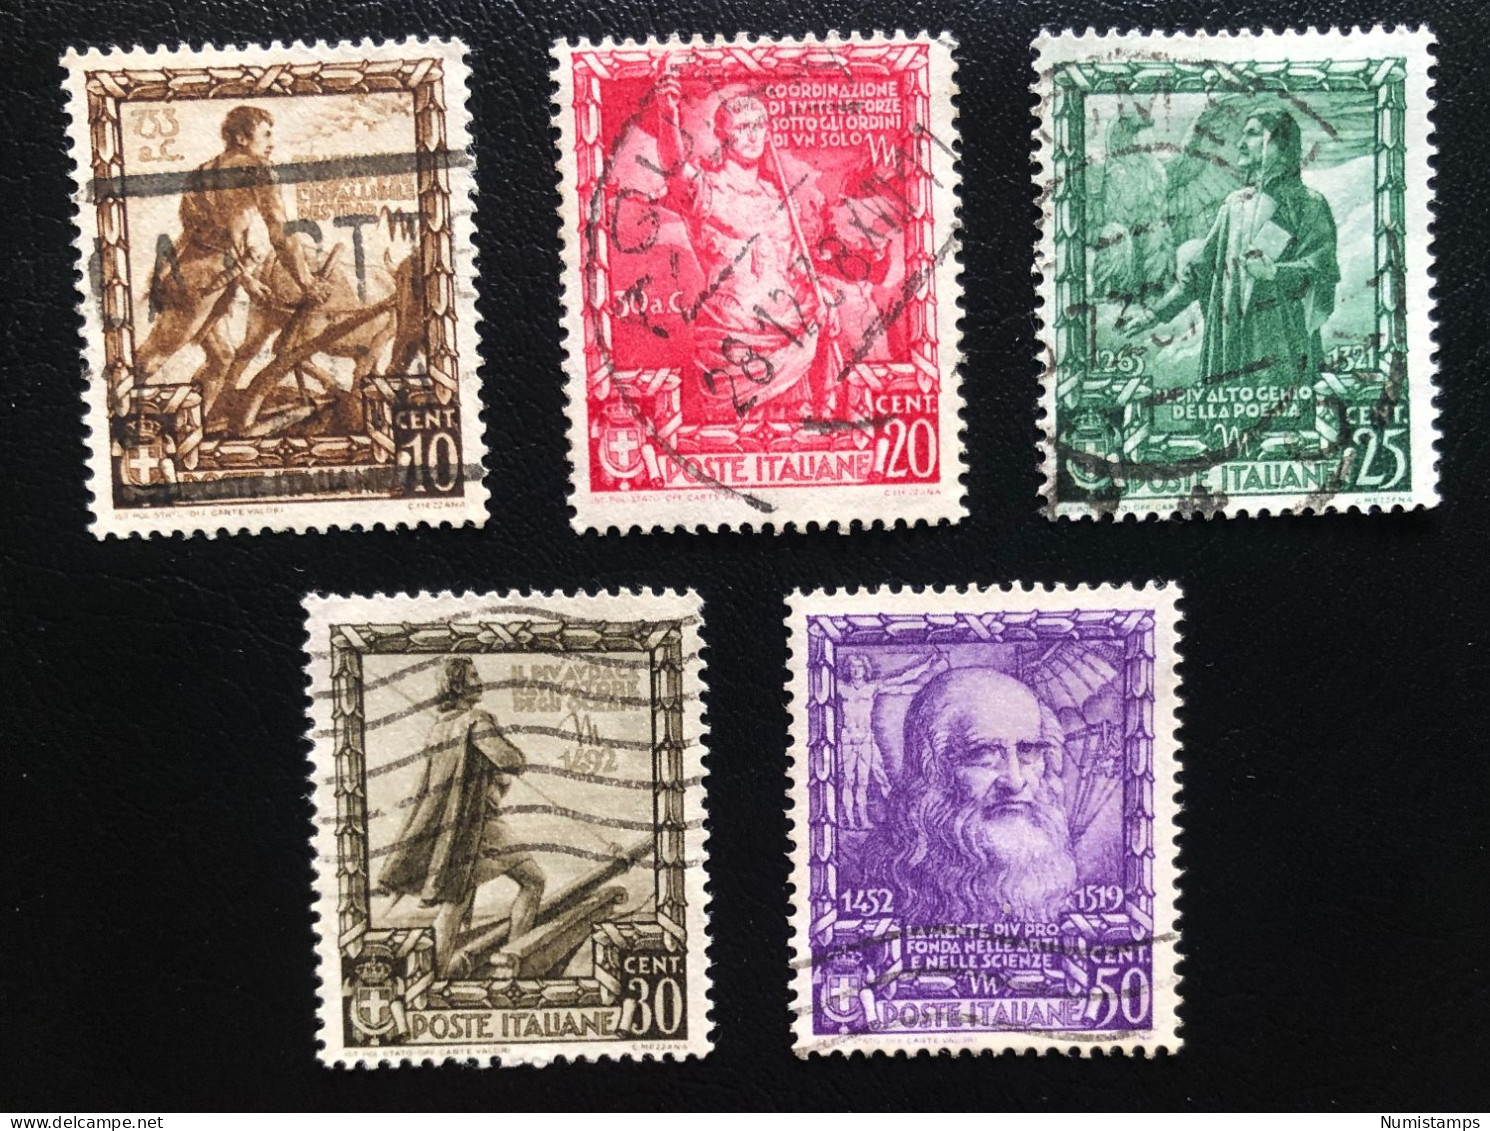 1938 - Proclamation Of The Empire (Series) - ITALY STAMPS - Used